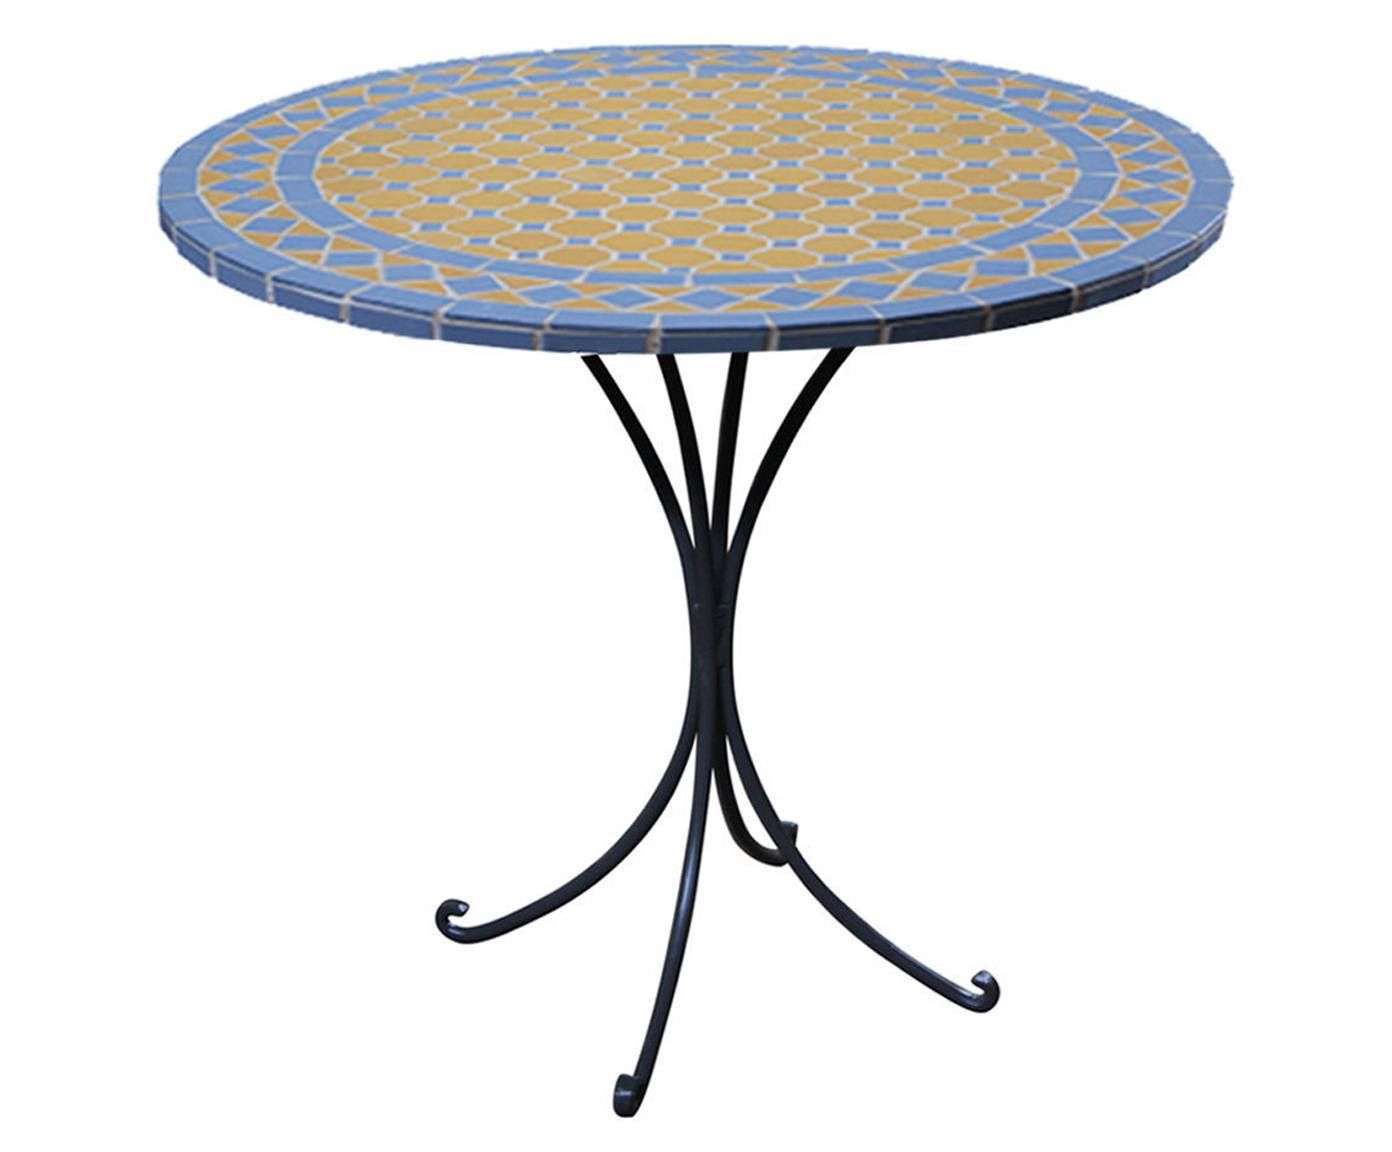 Mesa aten orchid - 75 x 60 cm | Westwing.com.br